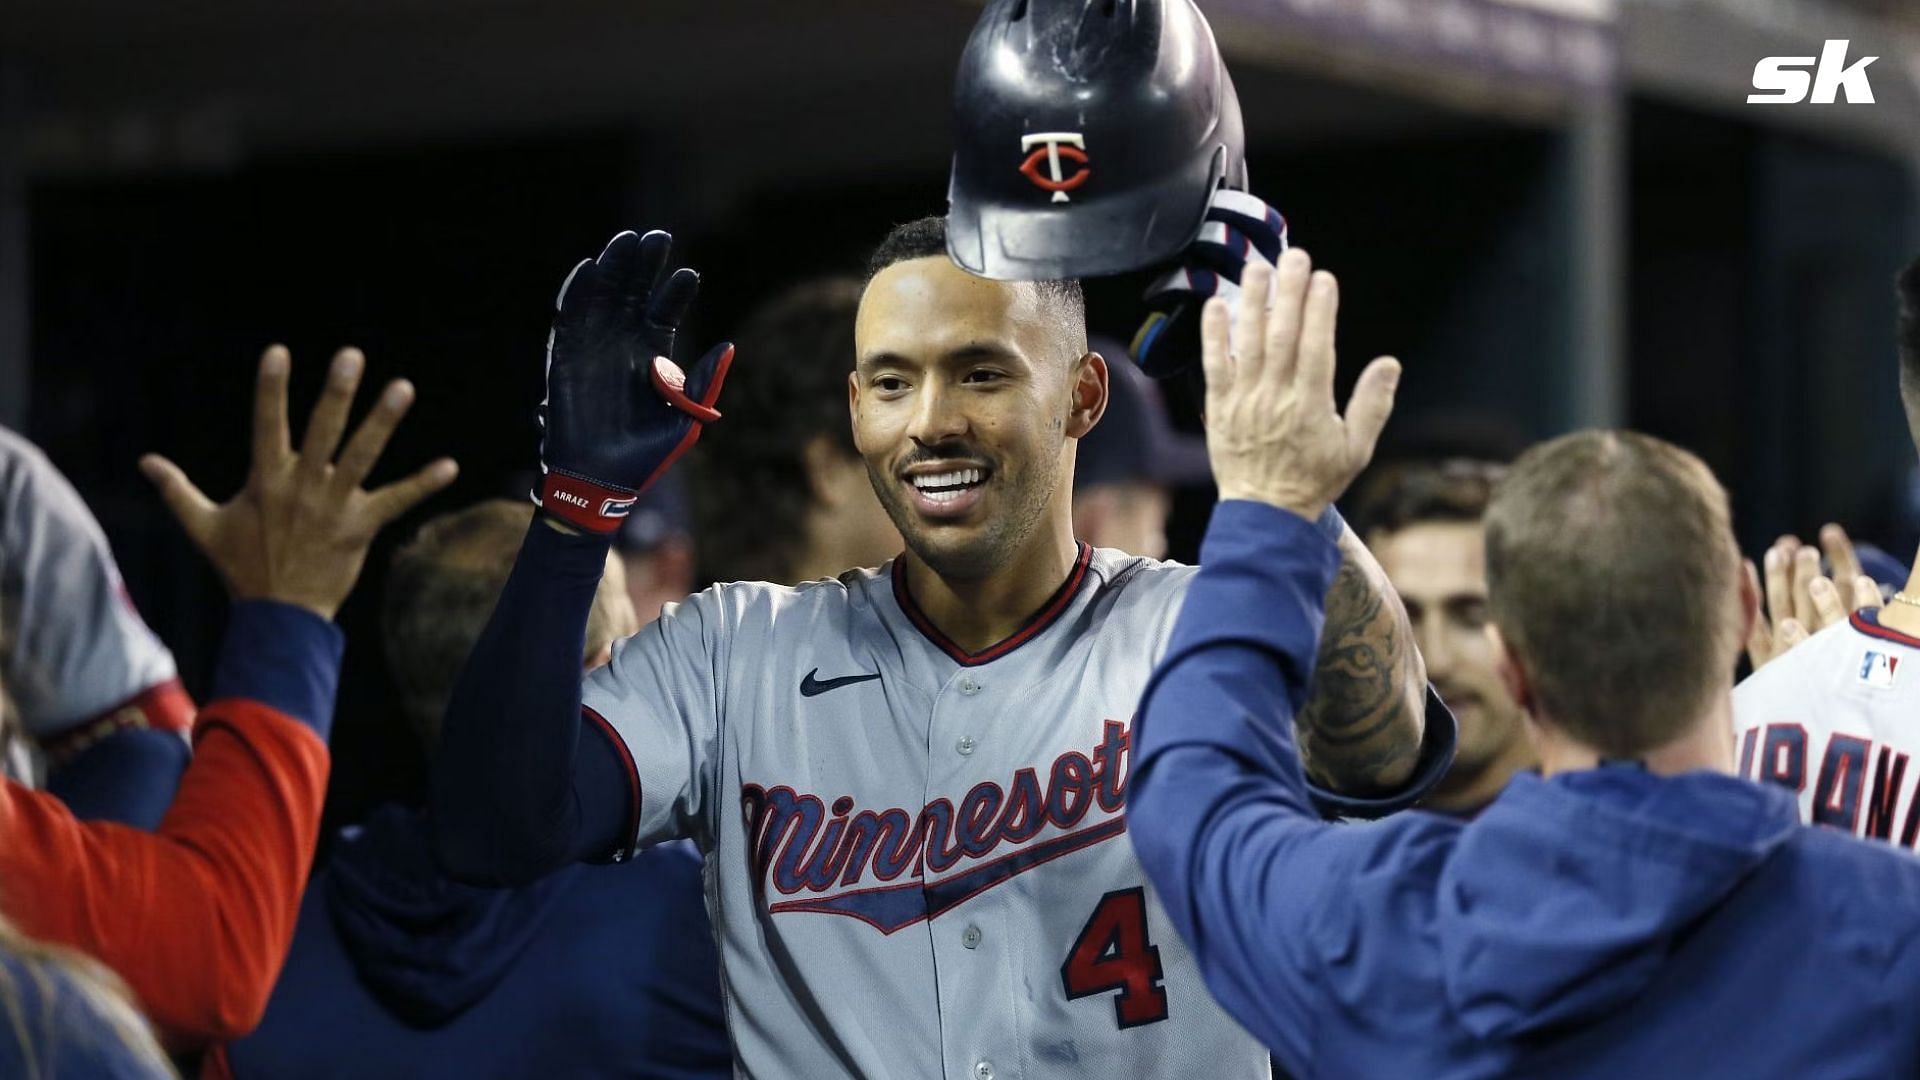 Carlos Correa going to the Mets after failed medical scuppers Giants deal